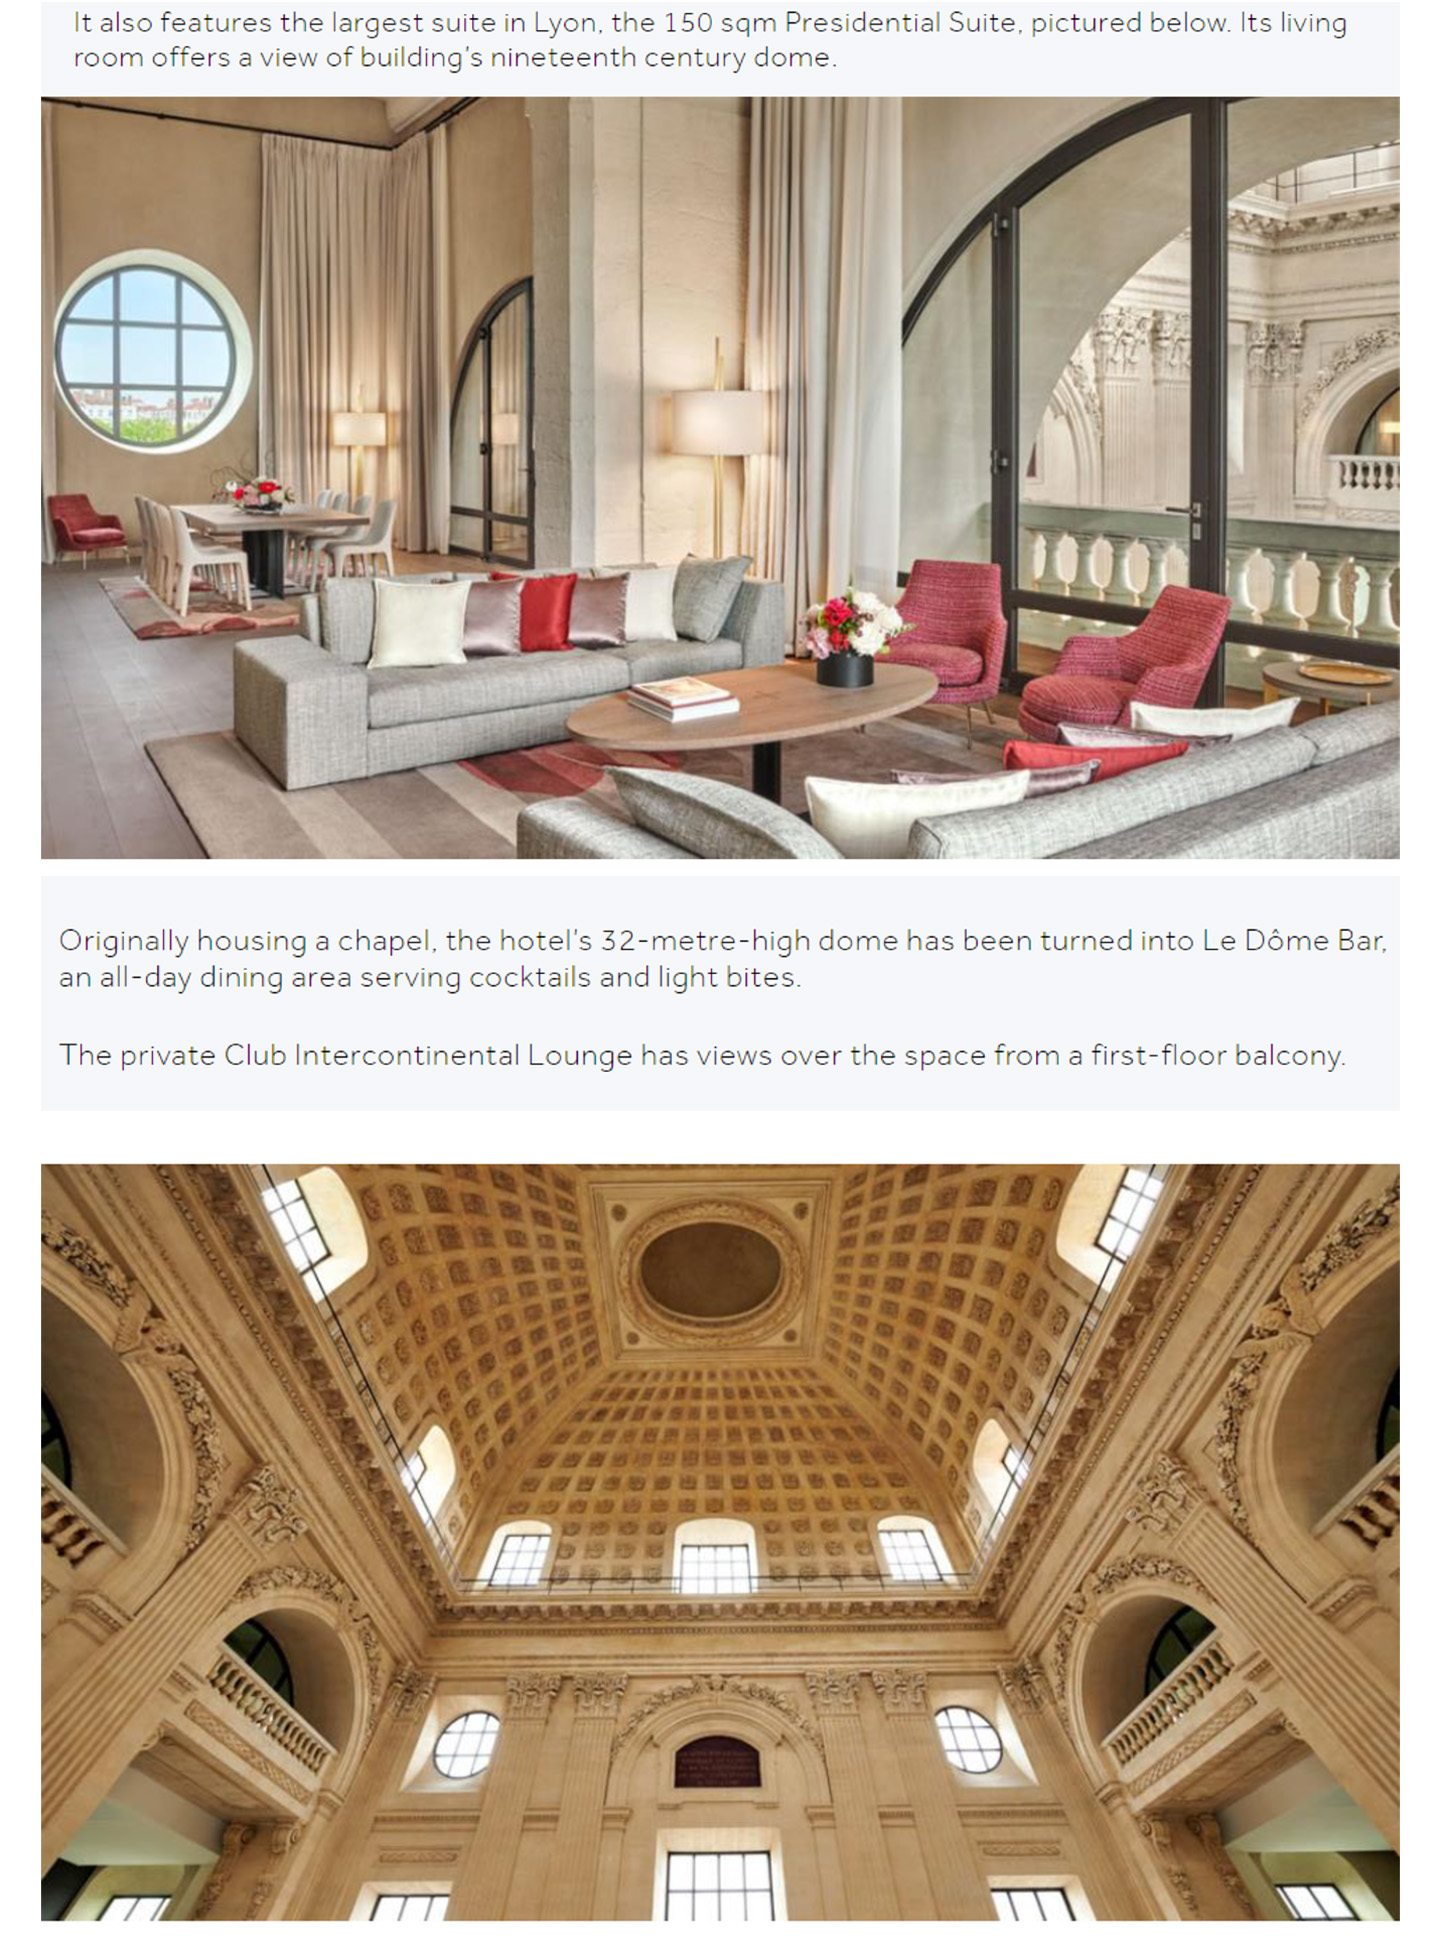 Article on the InterContinental Lyon - Hôtel Dieu realized by the studio jean-Philippe Nuel in the business traveller magazine, new hotel lifestyle, luxury interior design